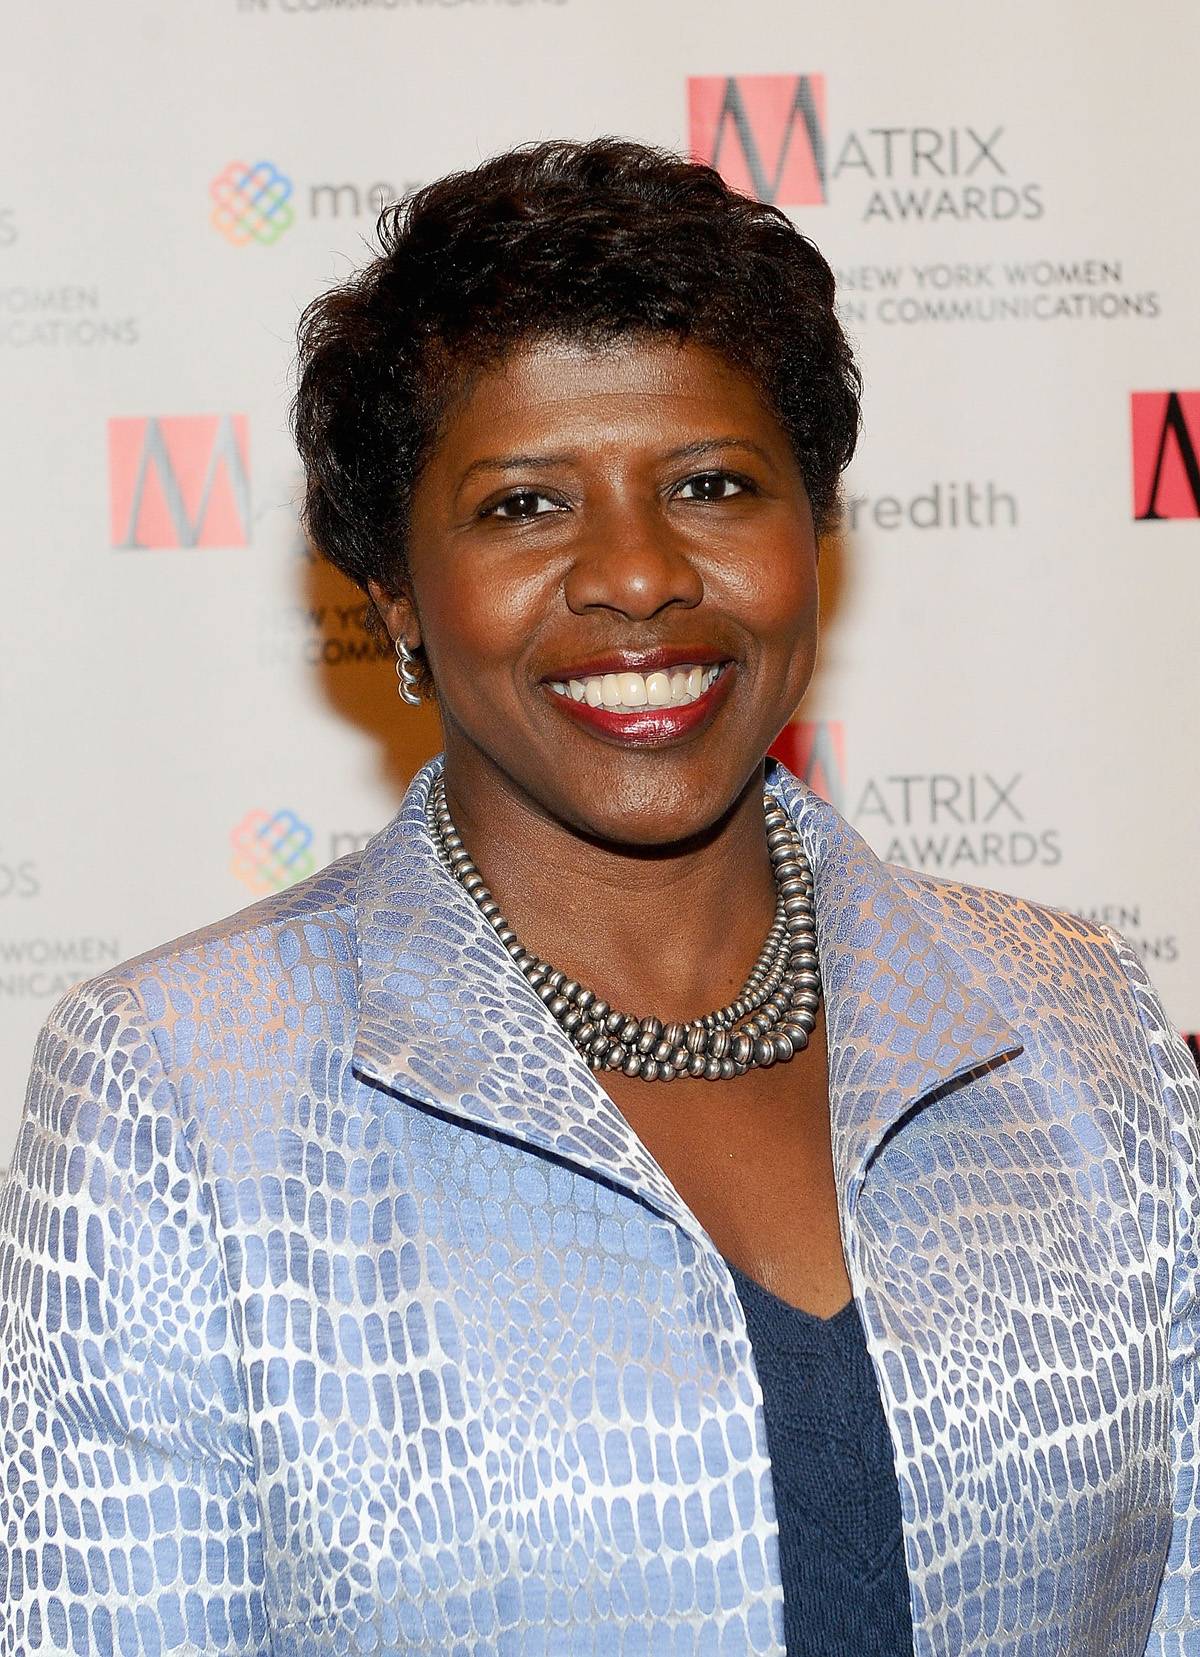 Gwen Ifill: September 29 - The PBS news anchor celebrates her 56th birthday. (Photo: Jamie McCarthy/Getty Images)